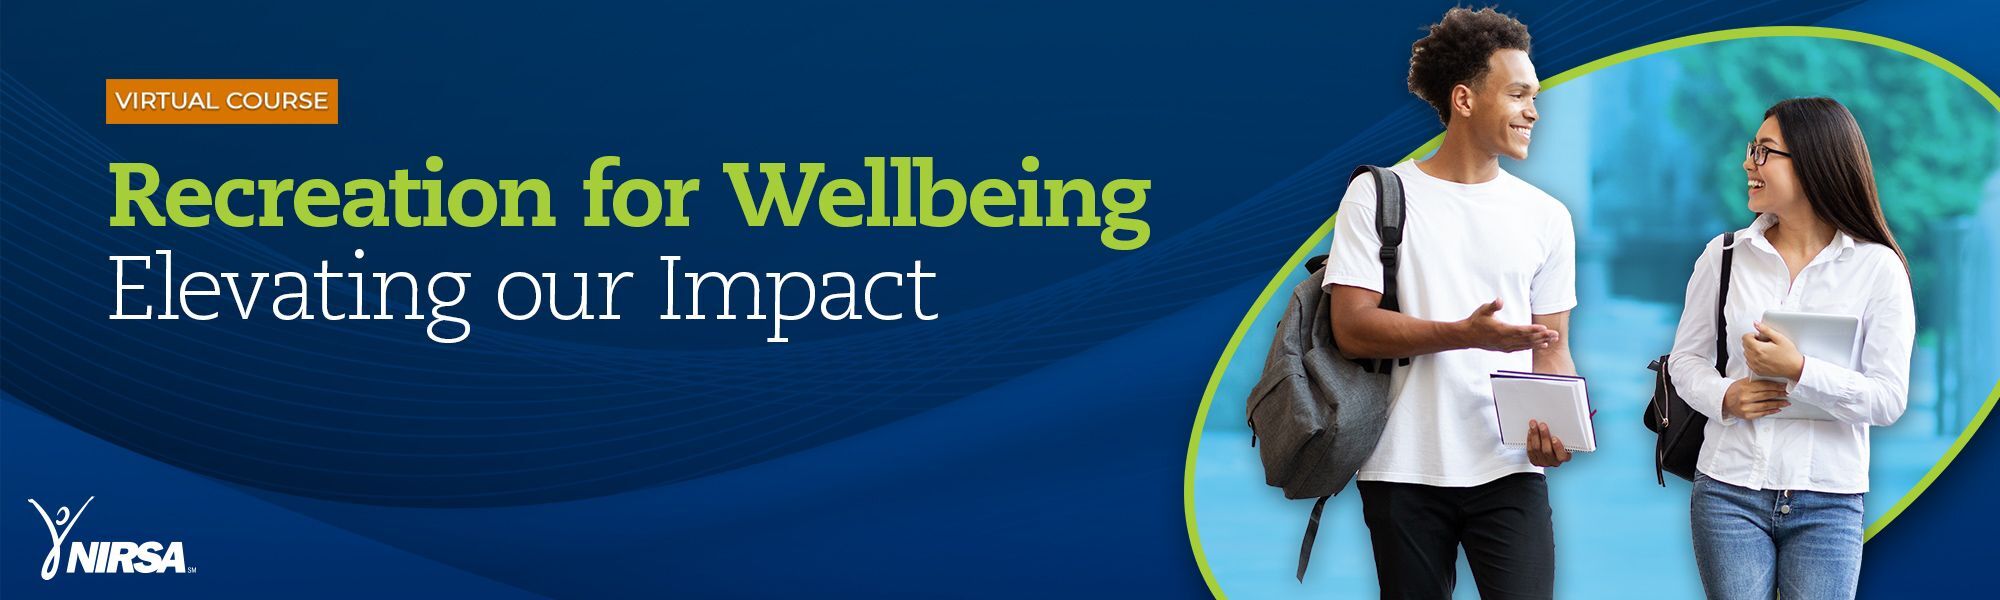 Recreation for Wellbeing: Elevating Our Impact